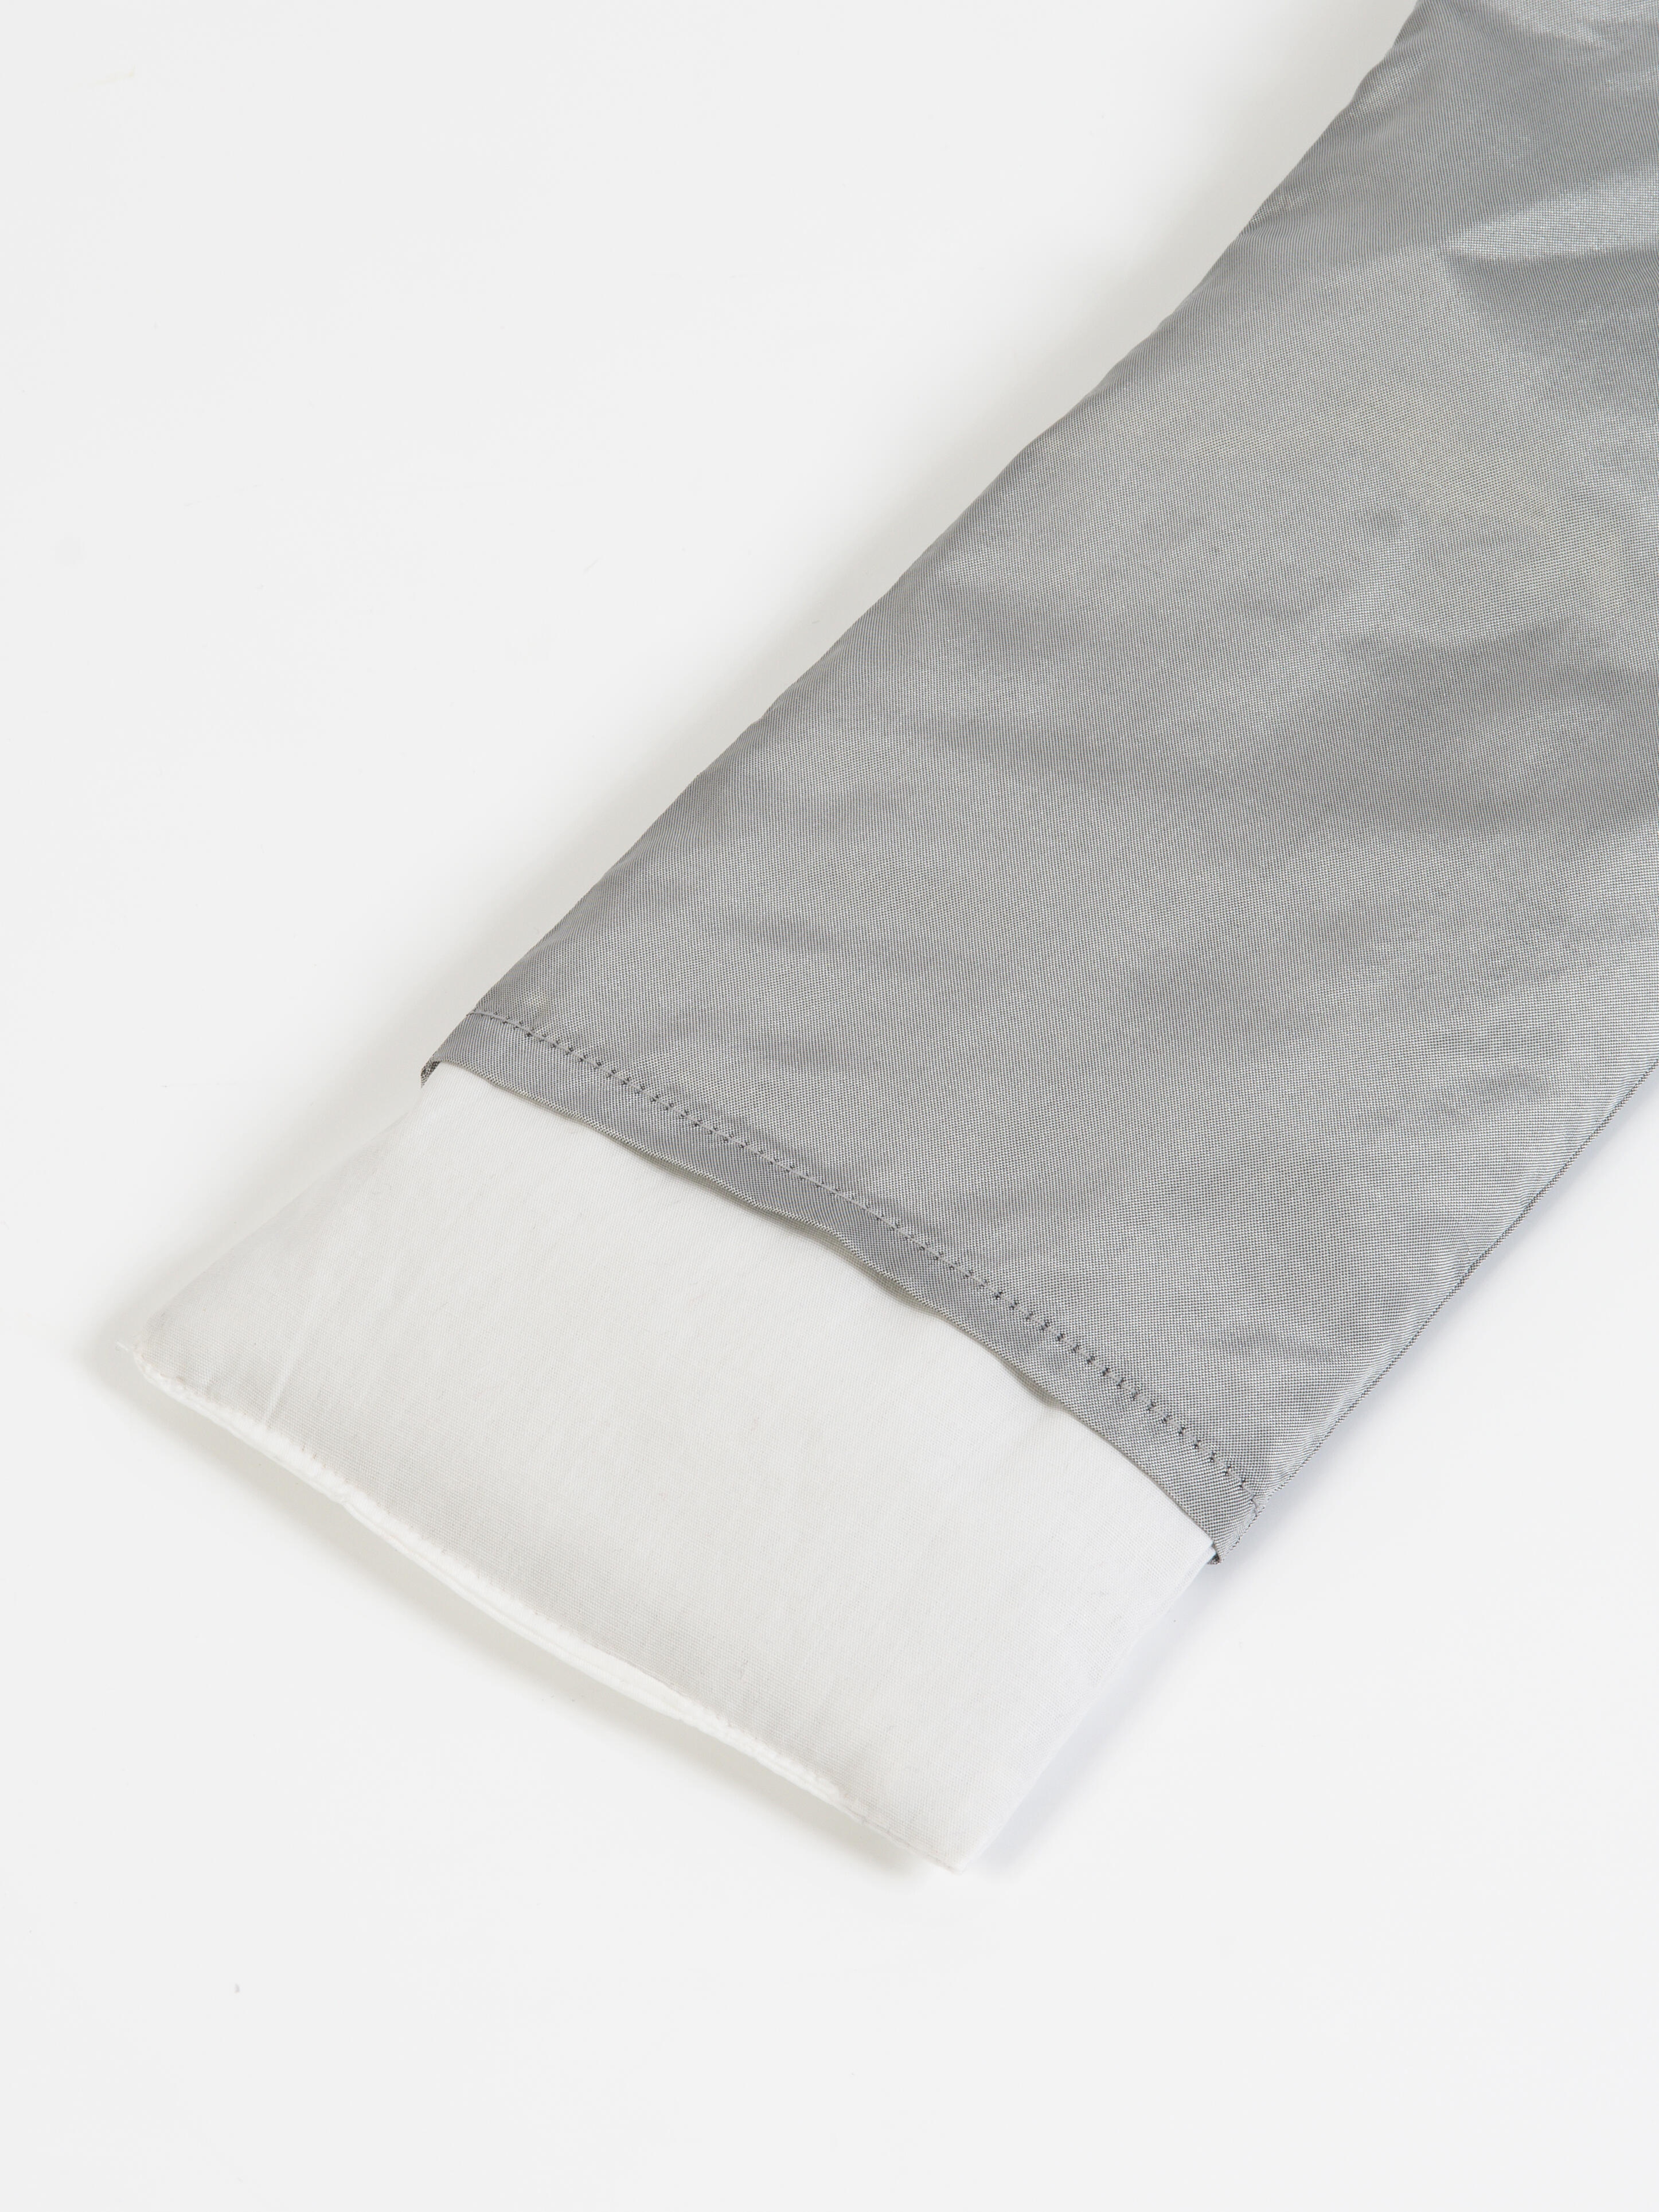 Yoga Studio Scented Lavender & Linseed Eye Pillows - Silver (Silk) 2/2